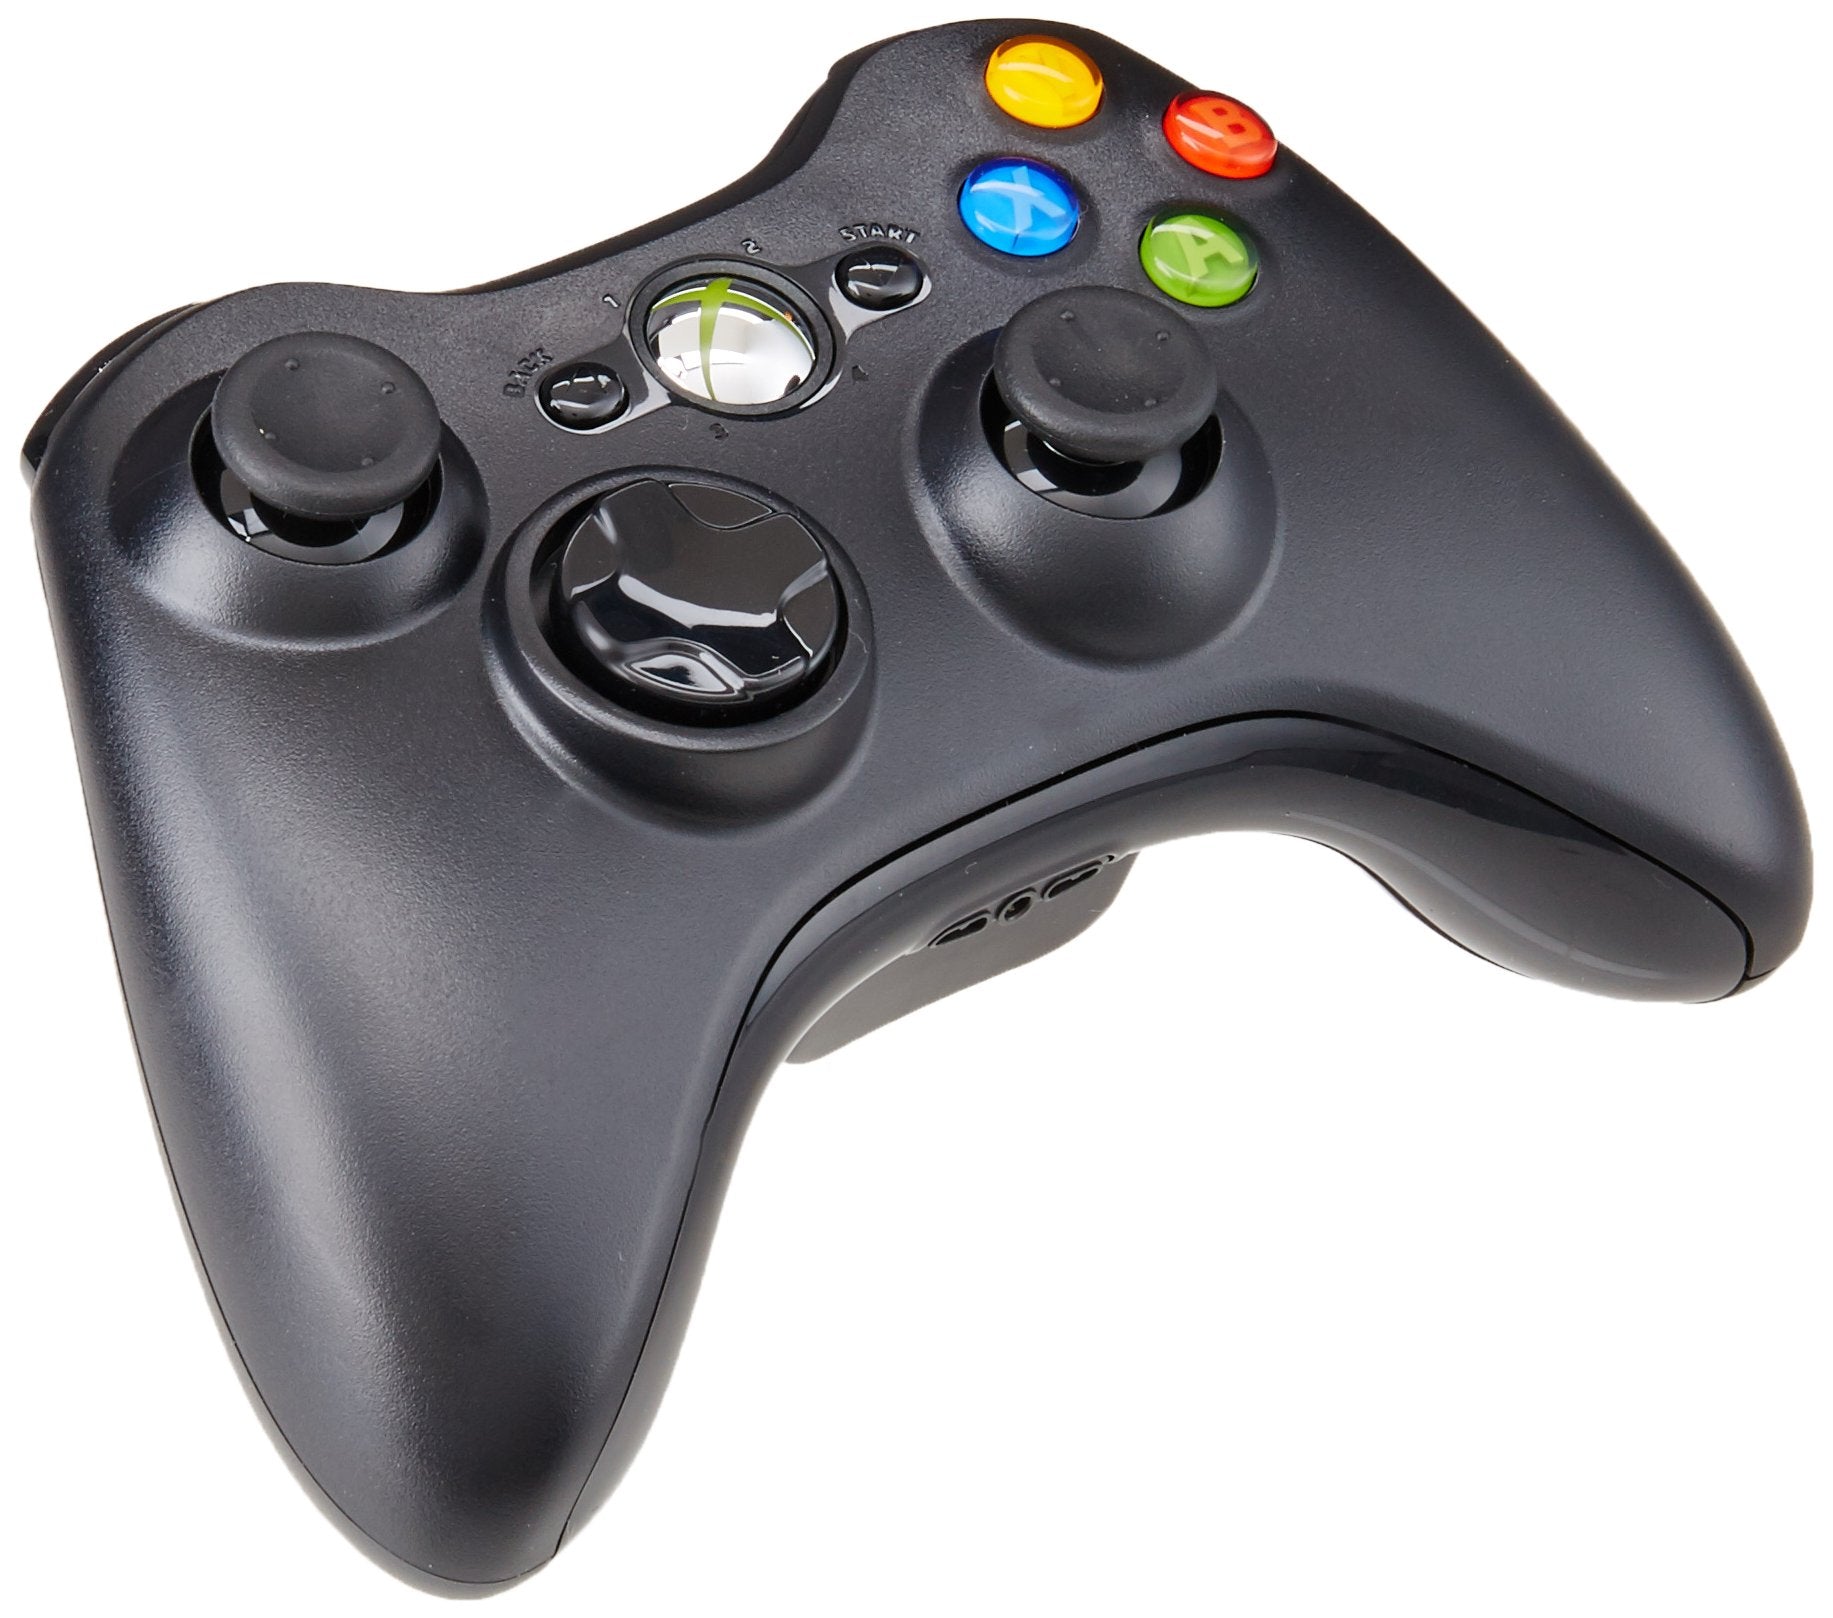 Official Microsoft Xbox 360 Wireless Gaming Controller - Black